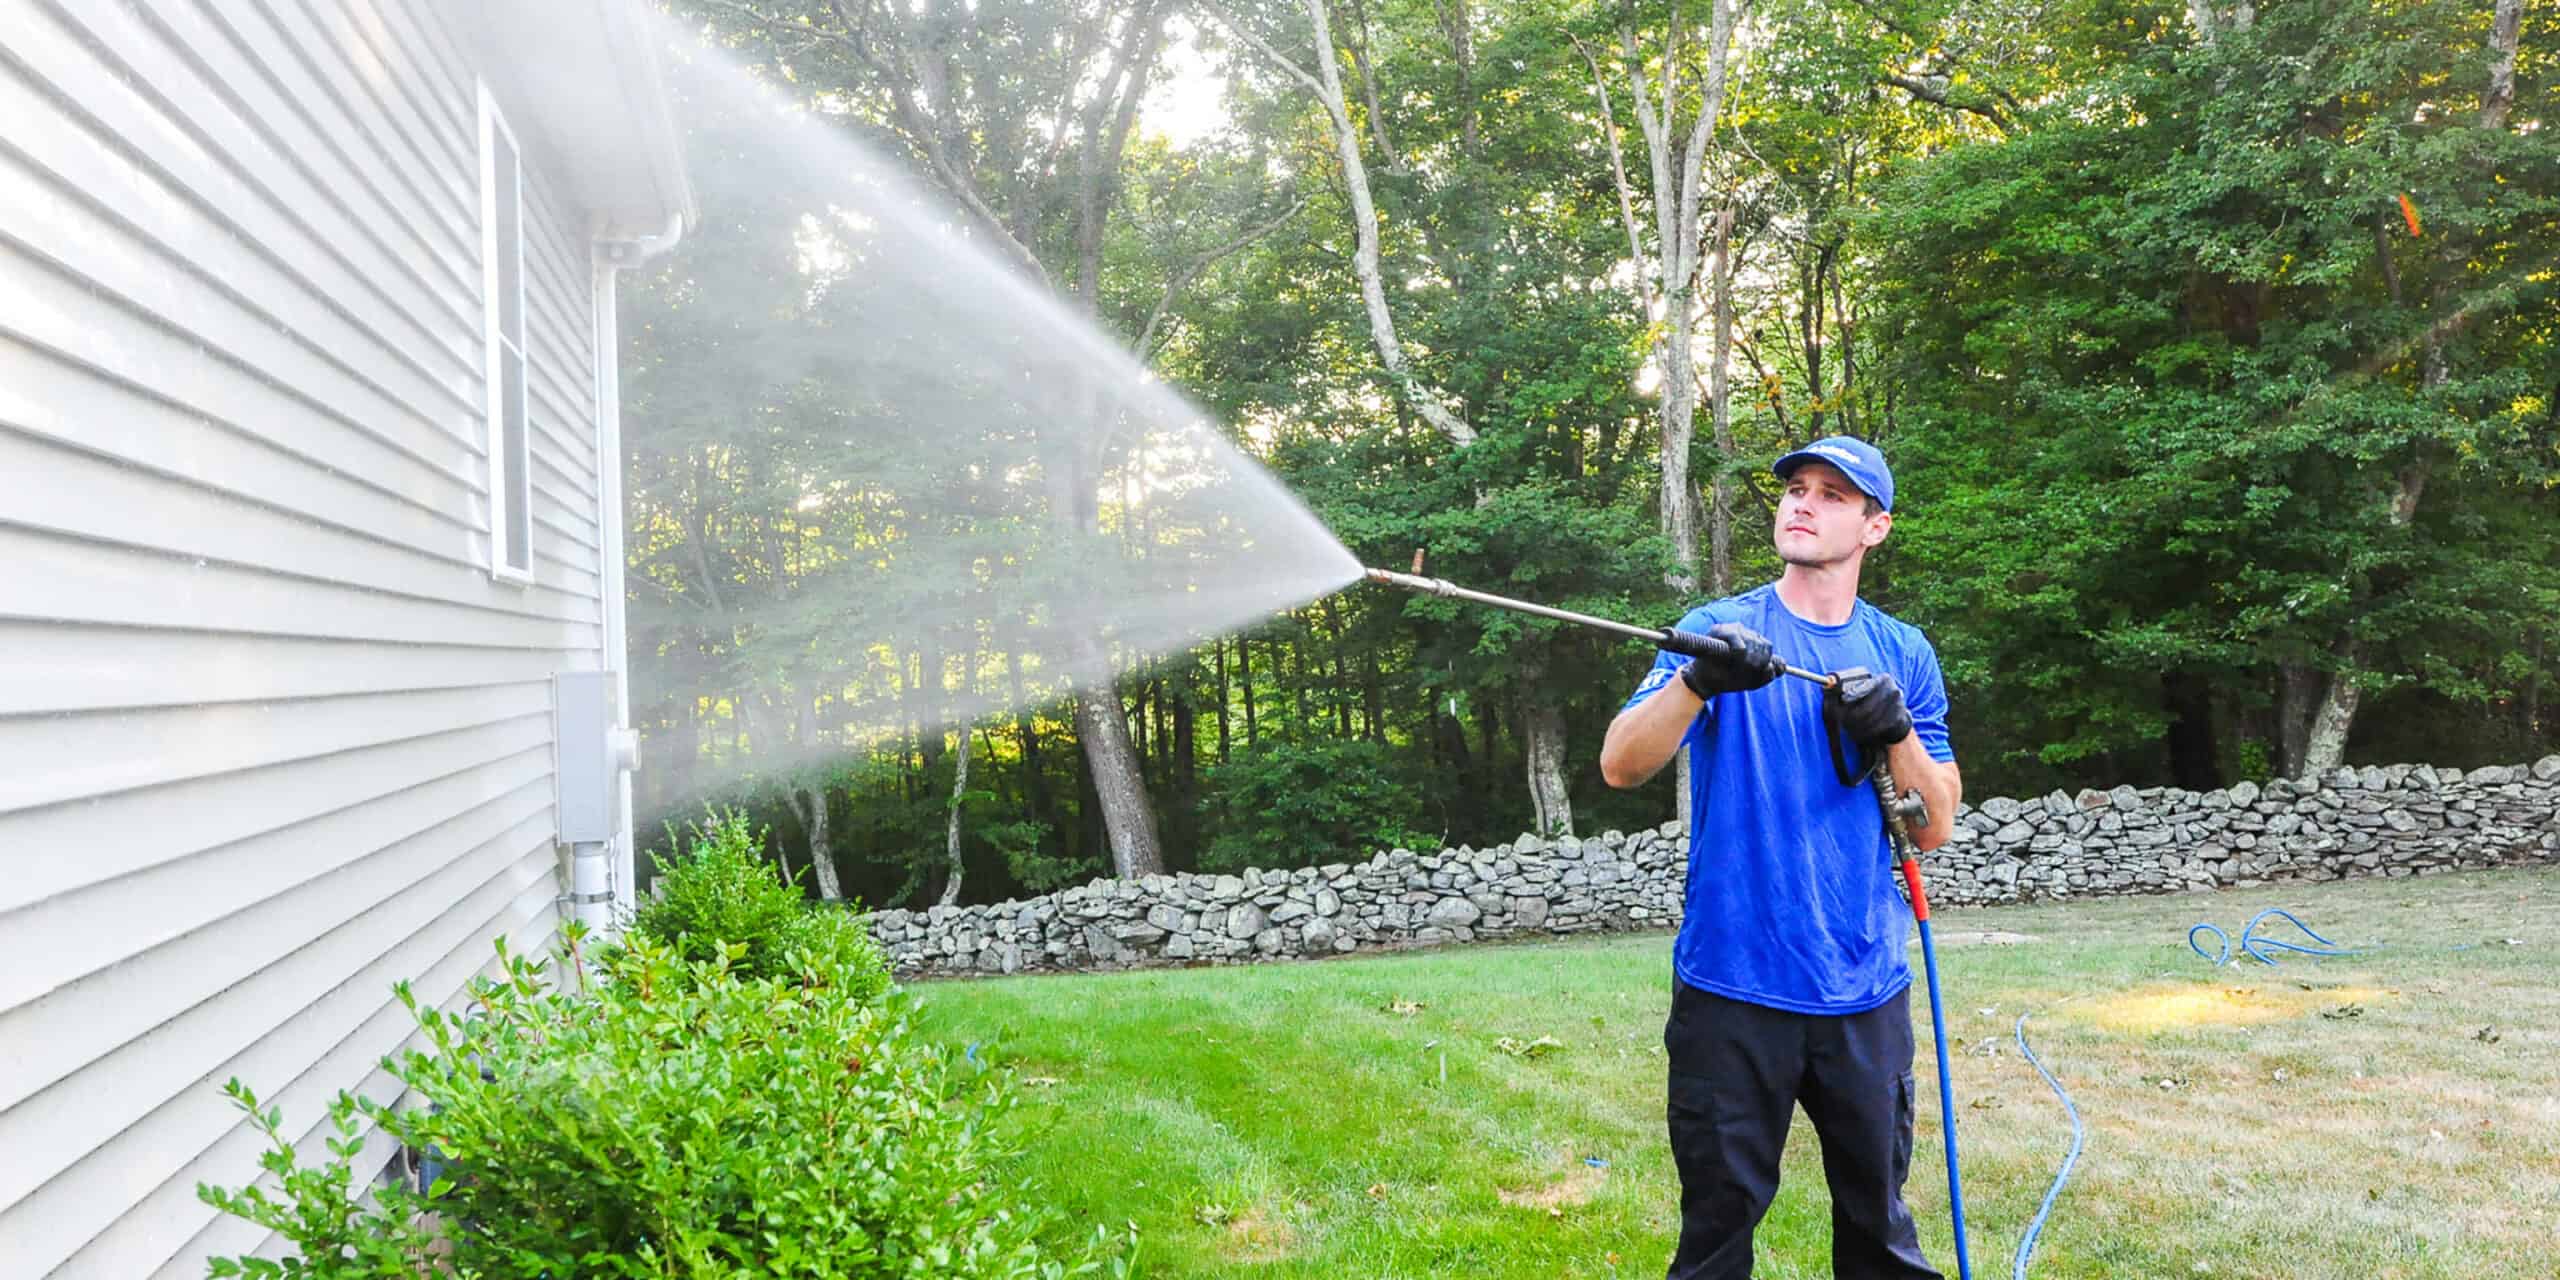 Blueline Pressure Washing & Outdoor Services Gray Tn